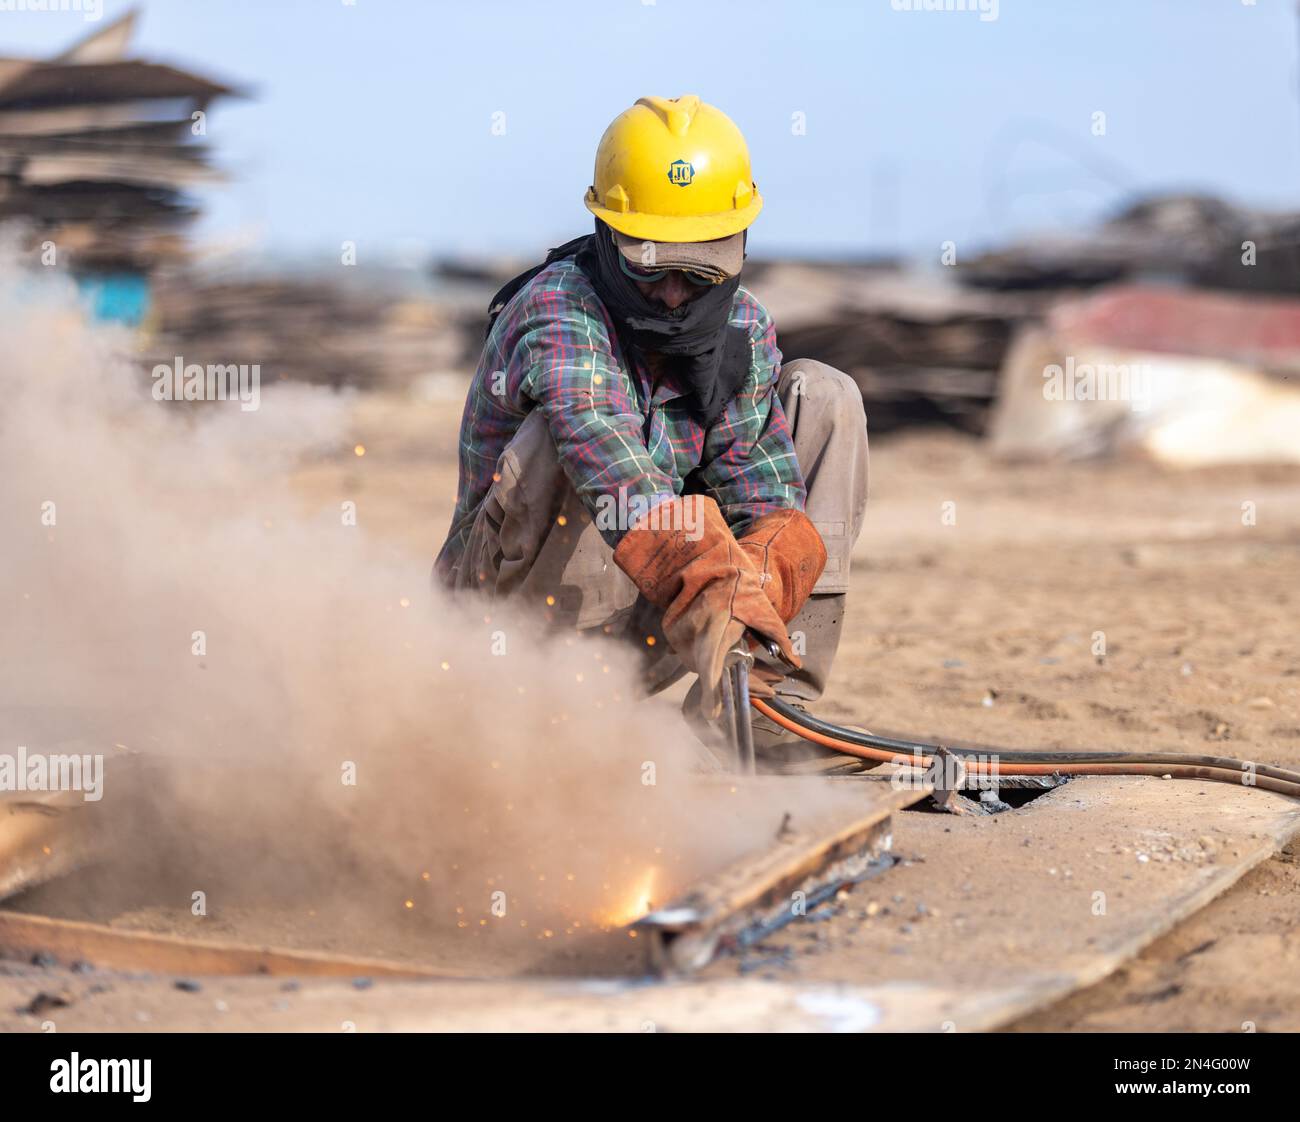 Gadani Pakistan August 2021, a worker wearing safety helmet cutting metal sheet with welding arc, labors working at ship bfreaking yard, labor day Pak Stock Photo